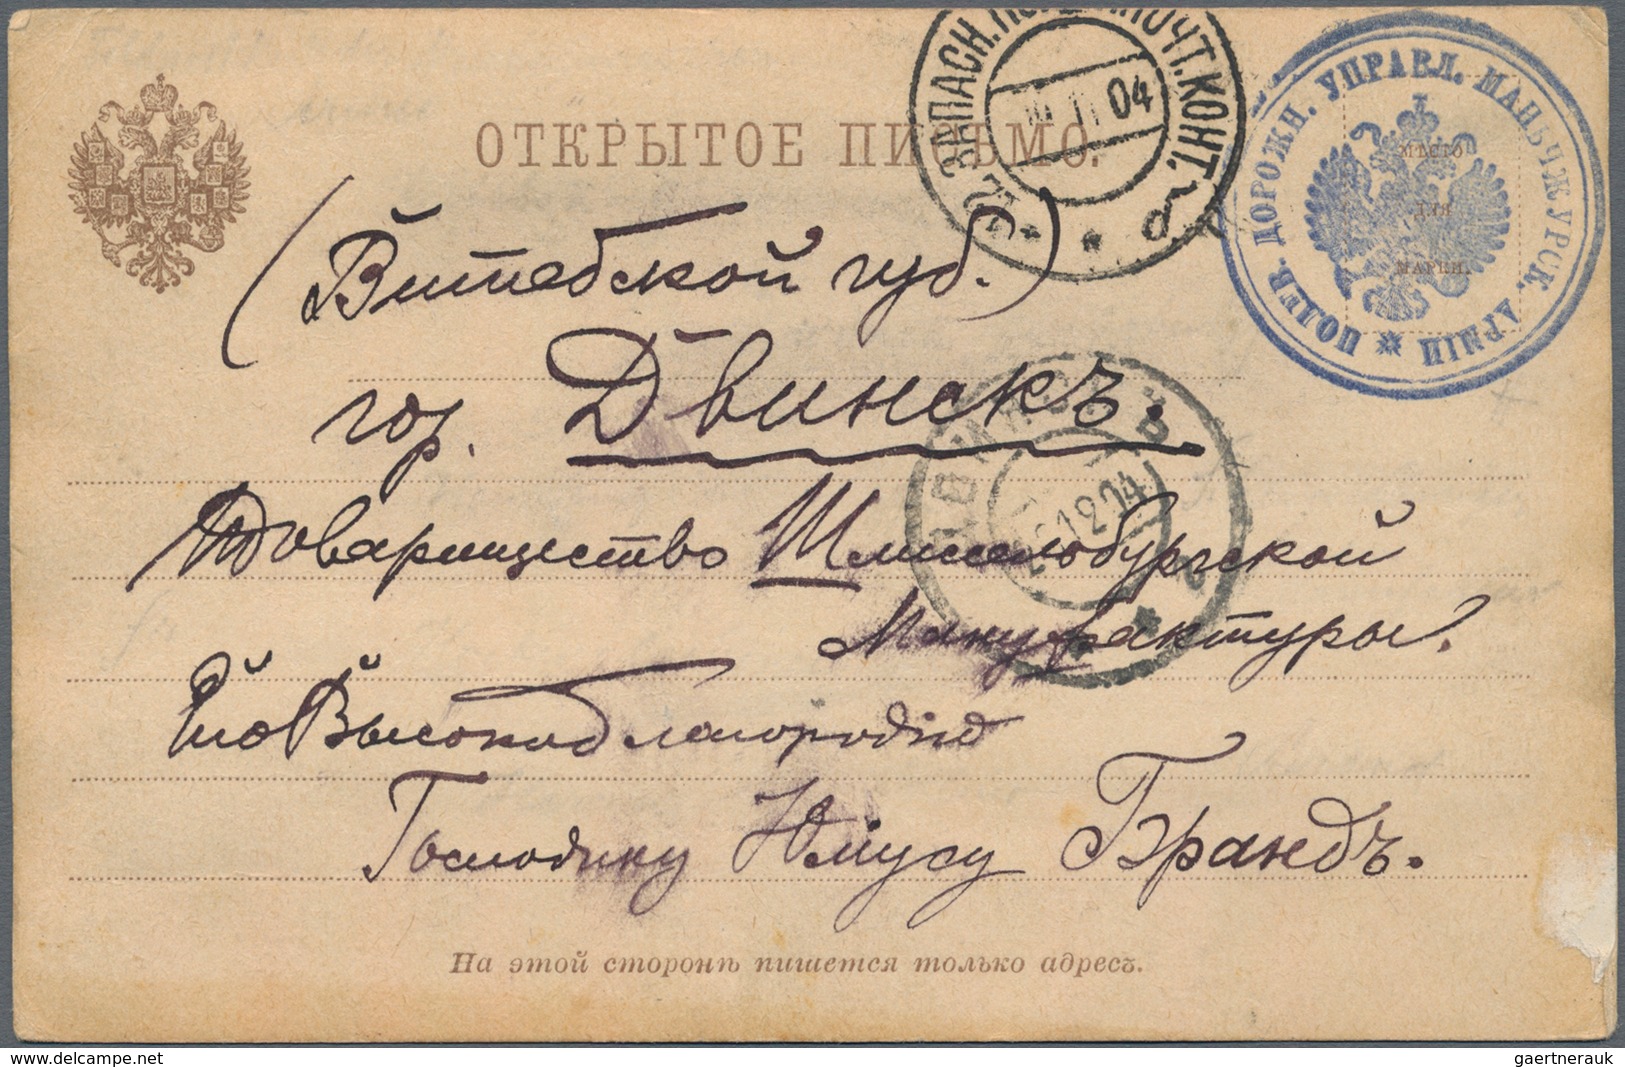 Russische Post In China: 19.11.1904 Russo-Japanese War Stampless Formular Card With Photo Of Mukden - China